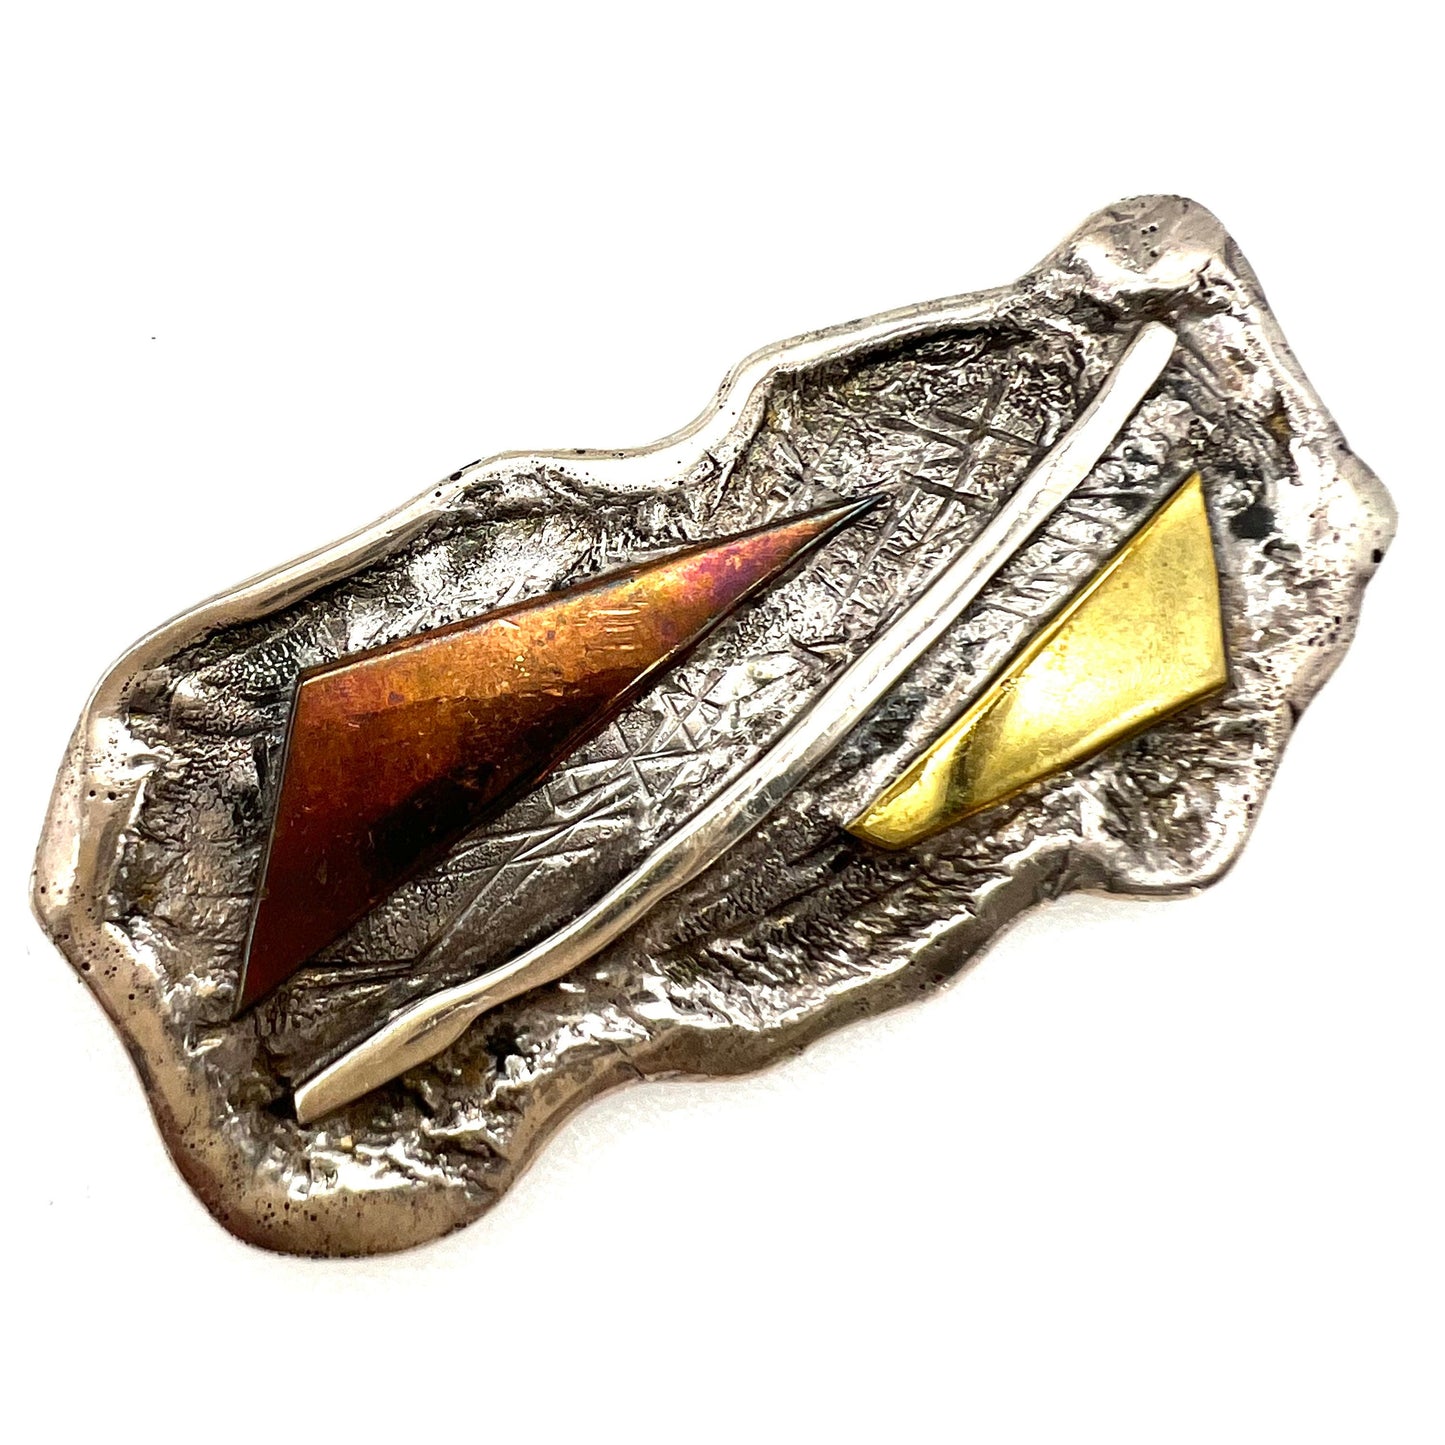 Iceland 925s Silver Free Form Brooch with Geometric Accents in Copper and Gold